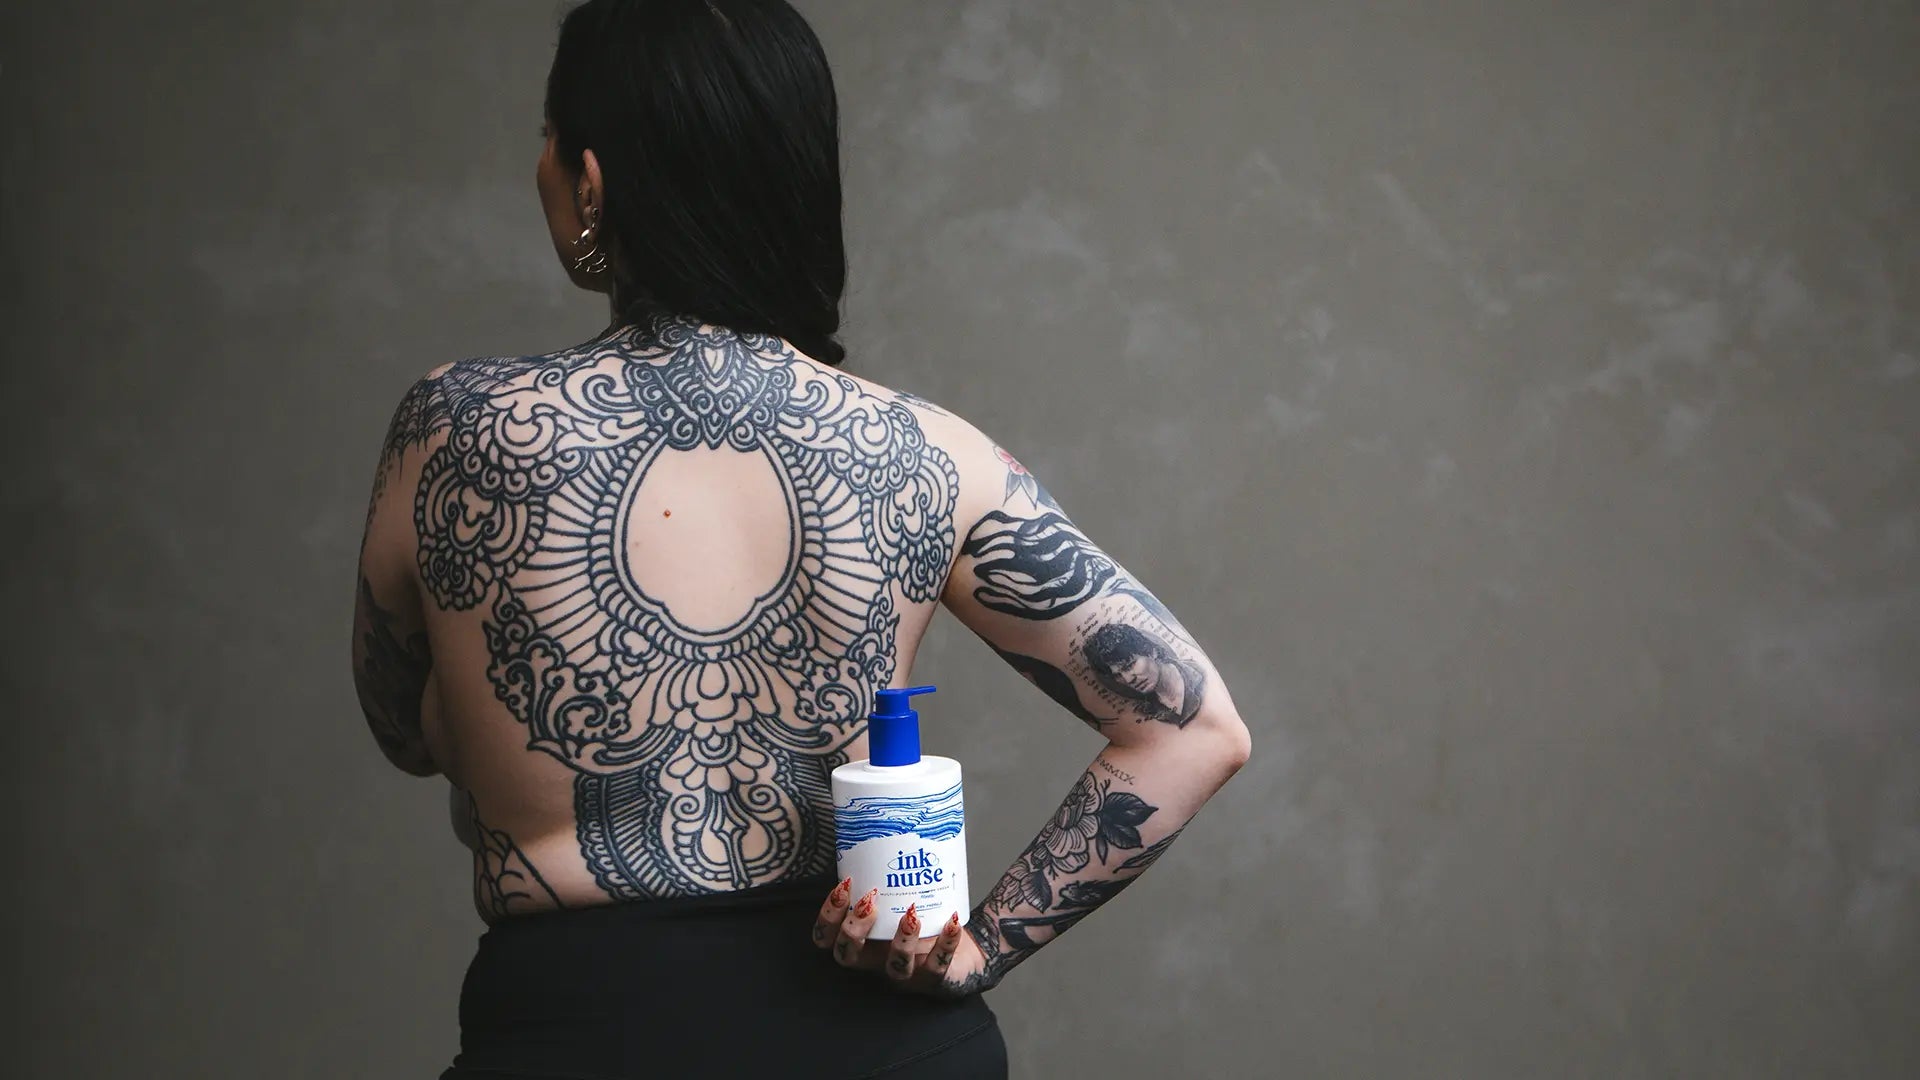 The Best Sunscreen For Tattoos According To Dermatologists